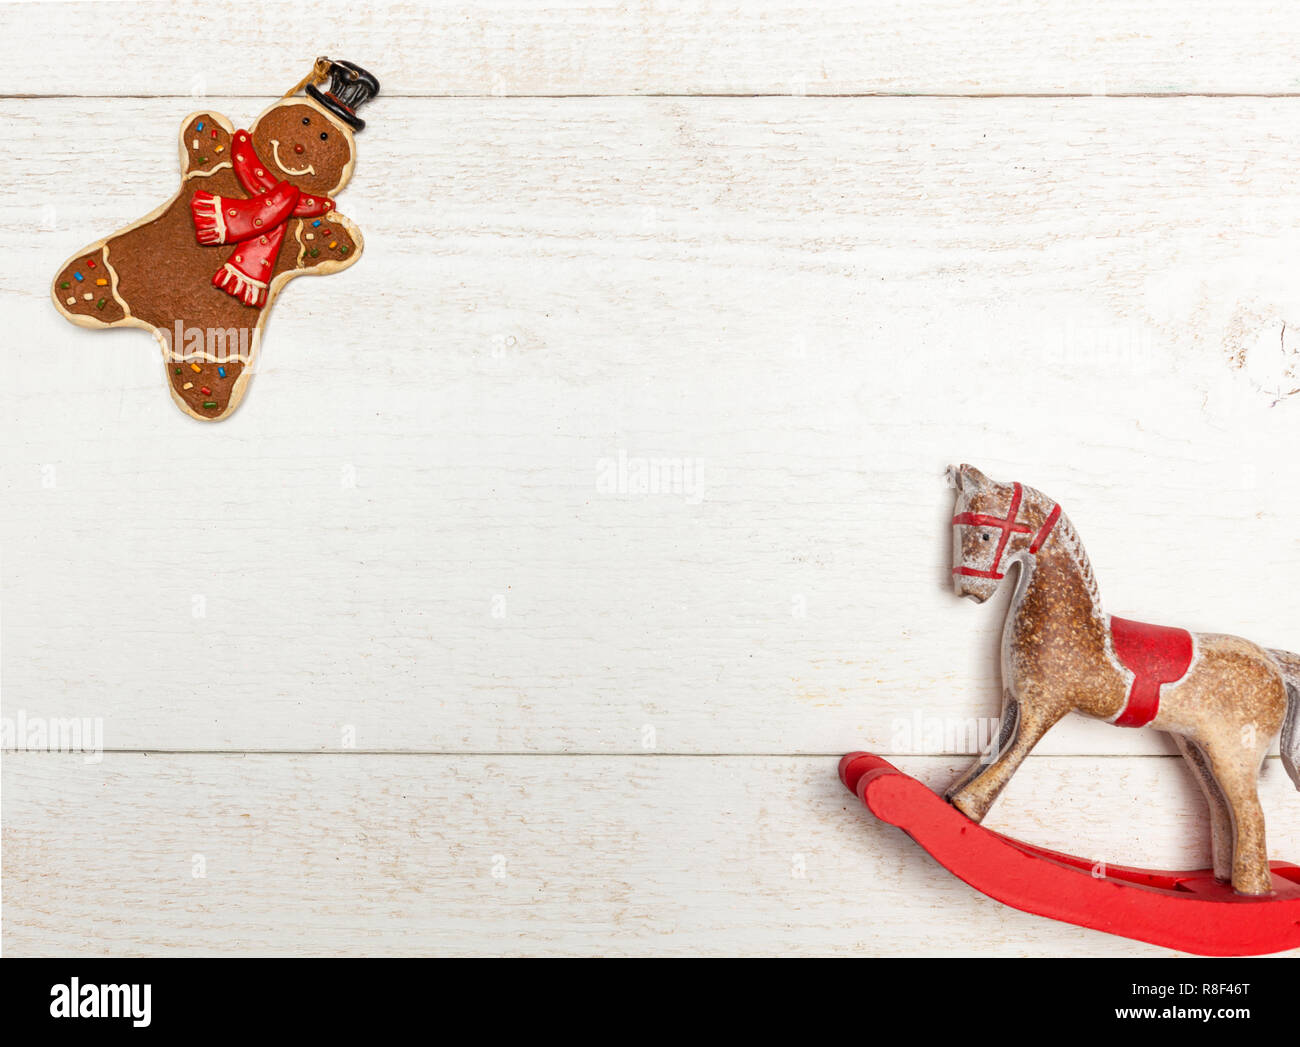 Christmas frame with gingerbread man and rocking horse on white wooden background with copy space. Stock Photo